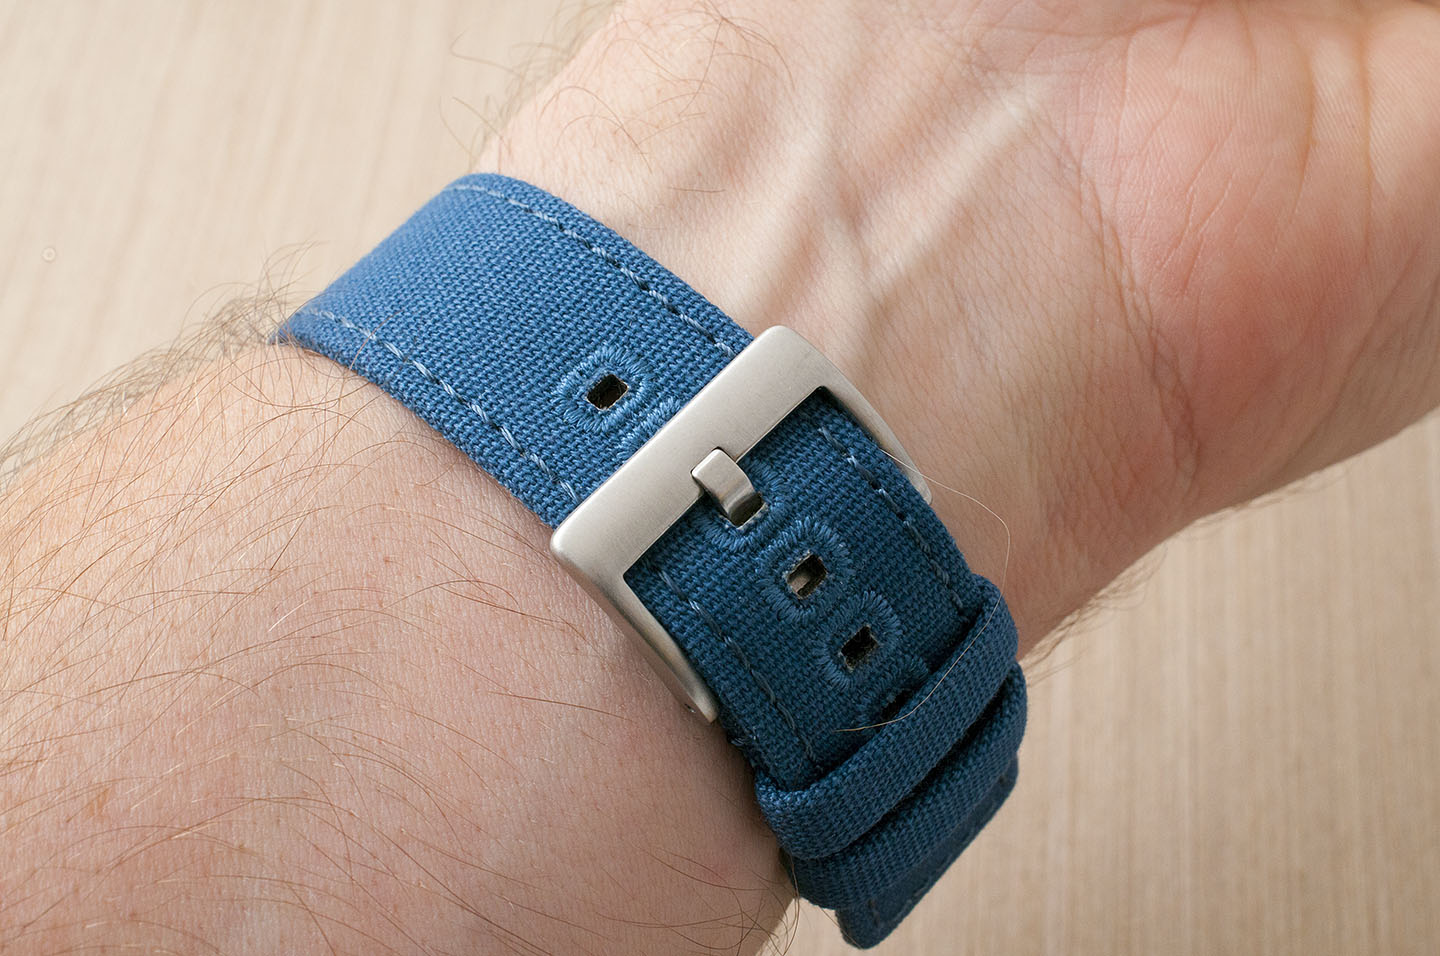 Canvas quick release watch strap band blue 20mm 22mm